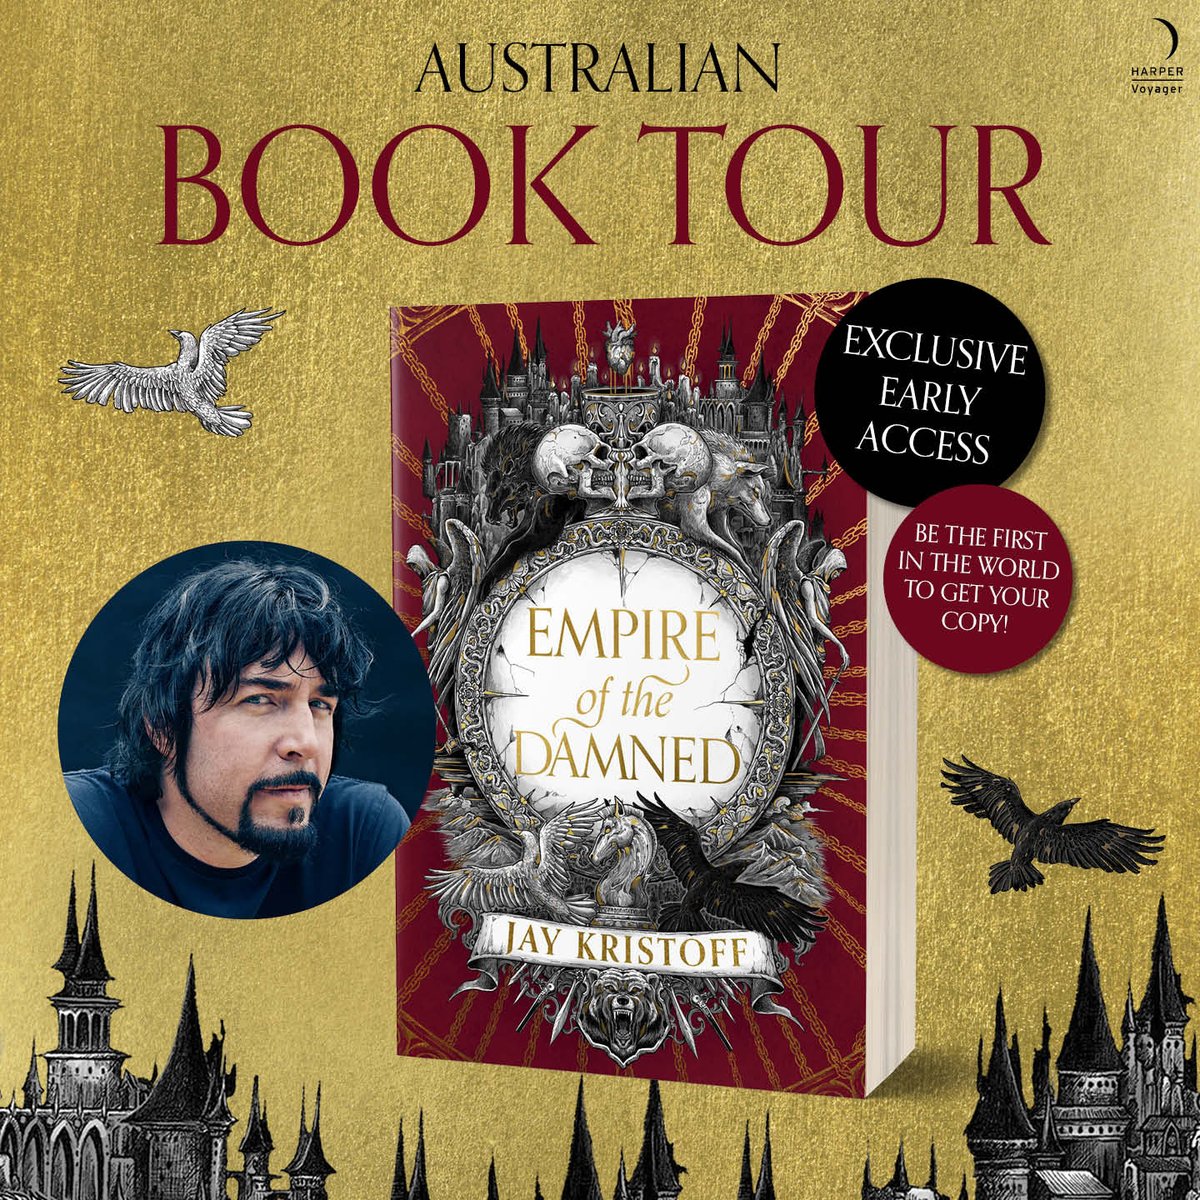 Aussie Droogs! Tickets are now available for the EMPIRE OF THE DAMNED Australian tour. Attendees will get their hands on EotD two weeks before the rest of Oz, and a weeks before anywhere else in the world! linktr.ee/eotdaustour